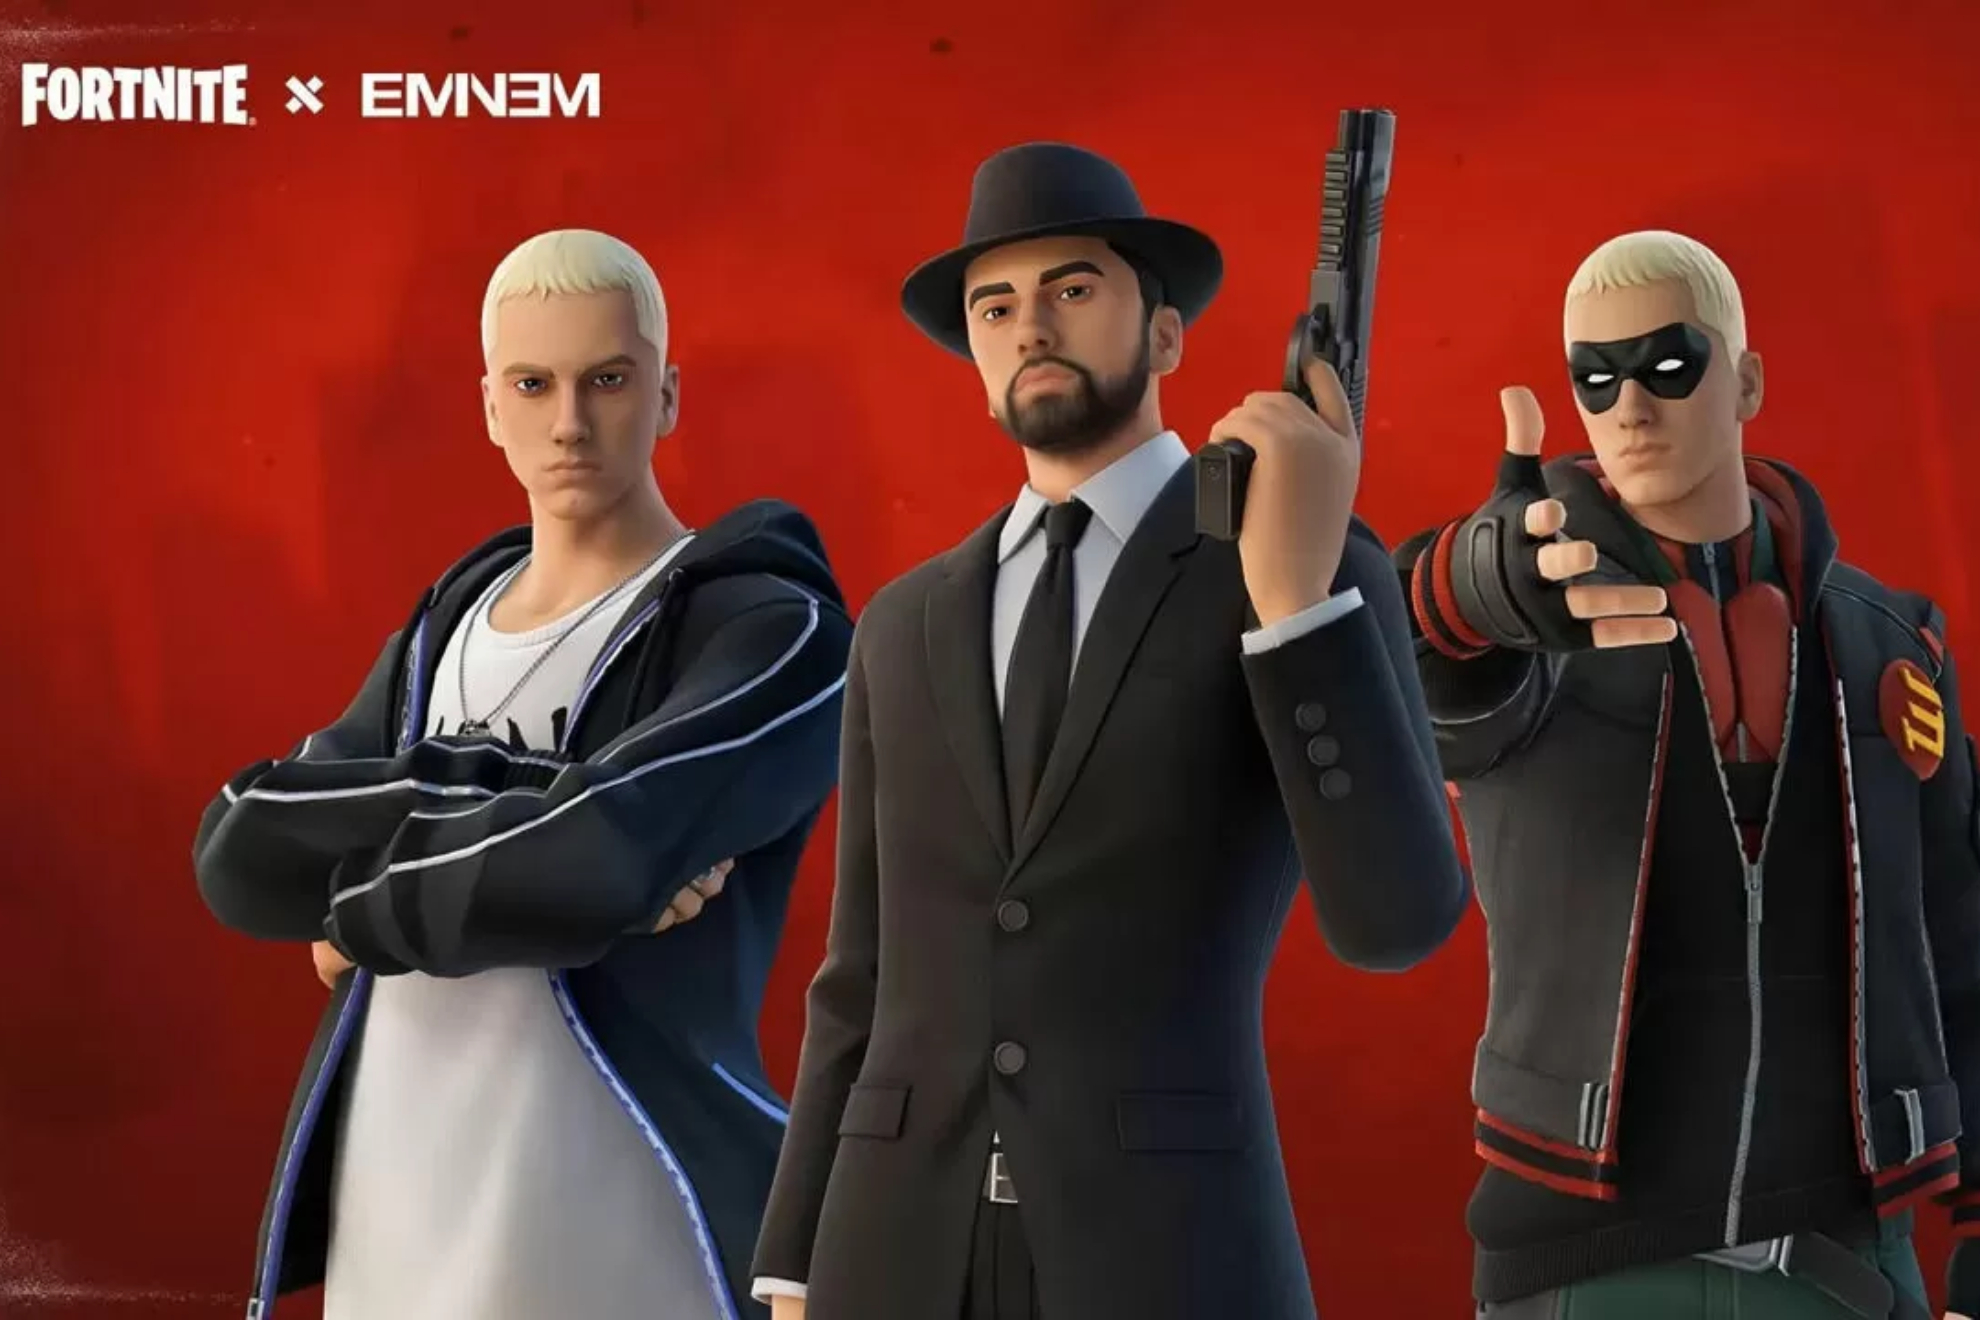 What time is Eminem and Fortnite event and where to watch Eminem's concert live online today